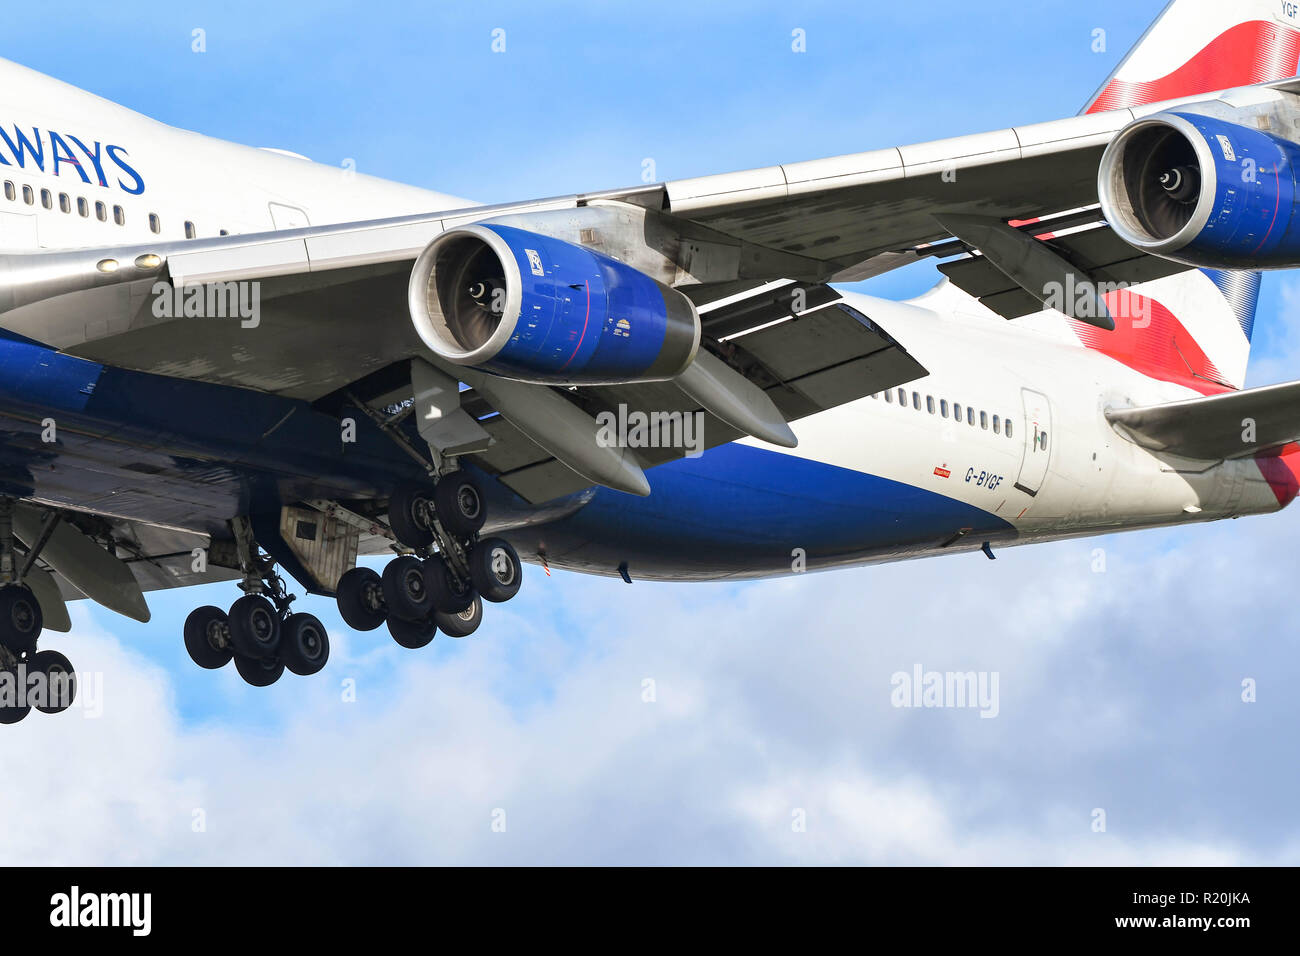 LONDON, ENGLAND - NOVEMBER 2018: Close up view of the engines, wheels and flaps of a Boeing 747 'Jumbo jet' as it comes in to land at London Heathrow  Stock Photo